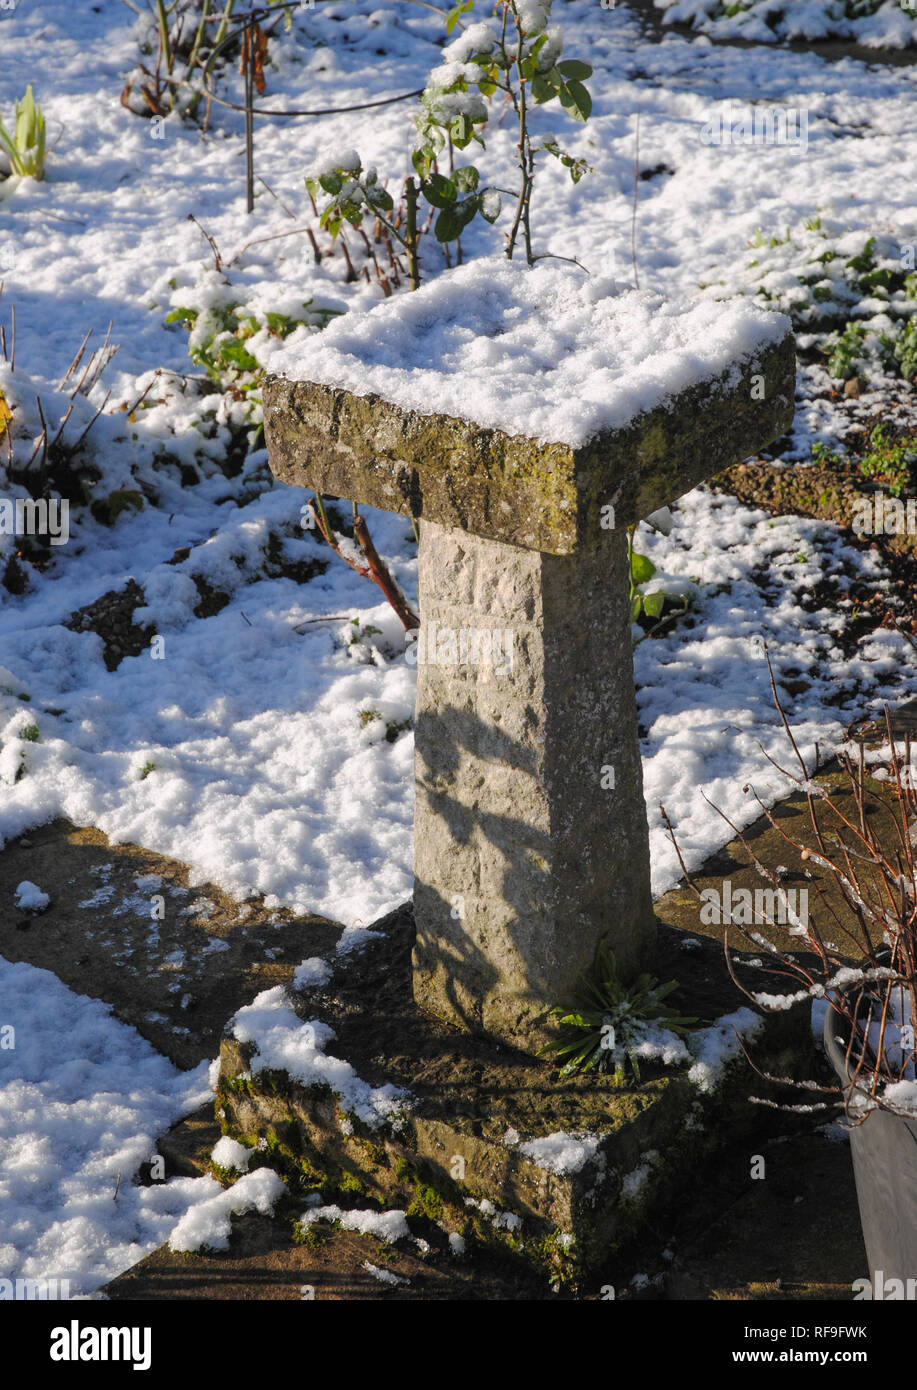 A stone bird bath with winter snow and sunshine in a UK garden Stock Photo